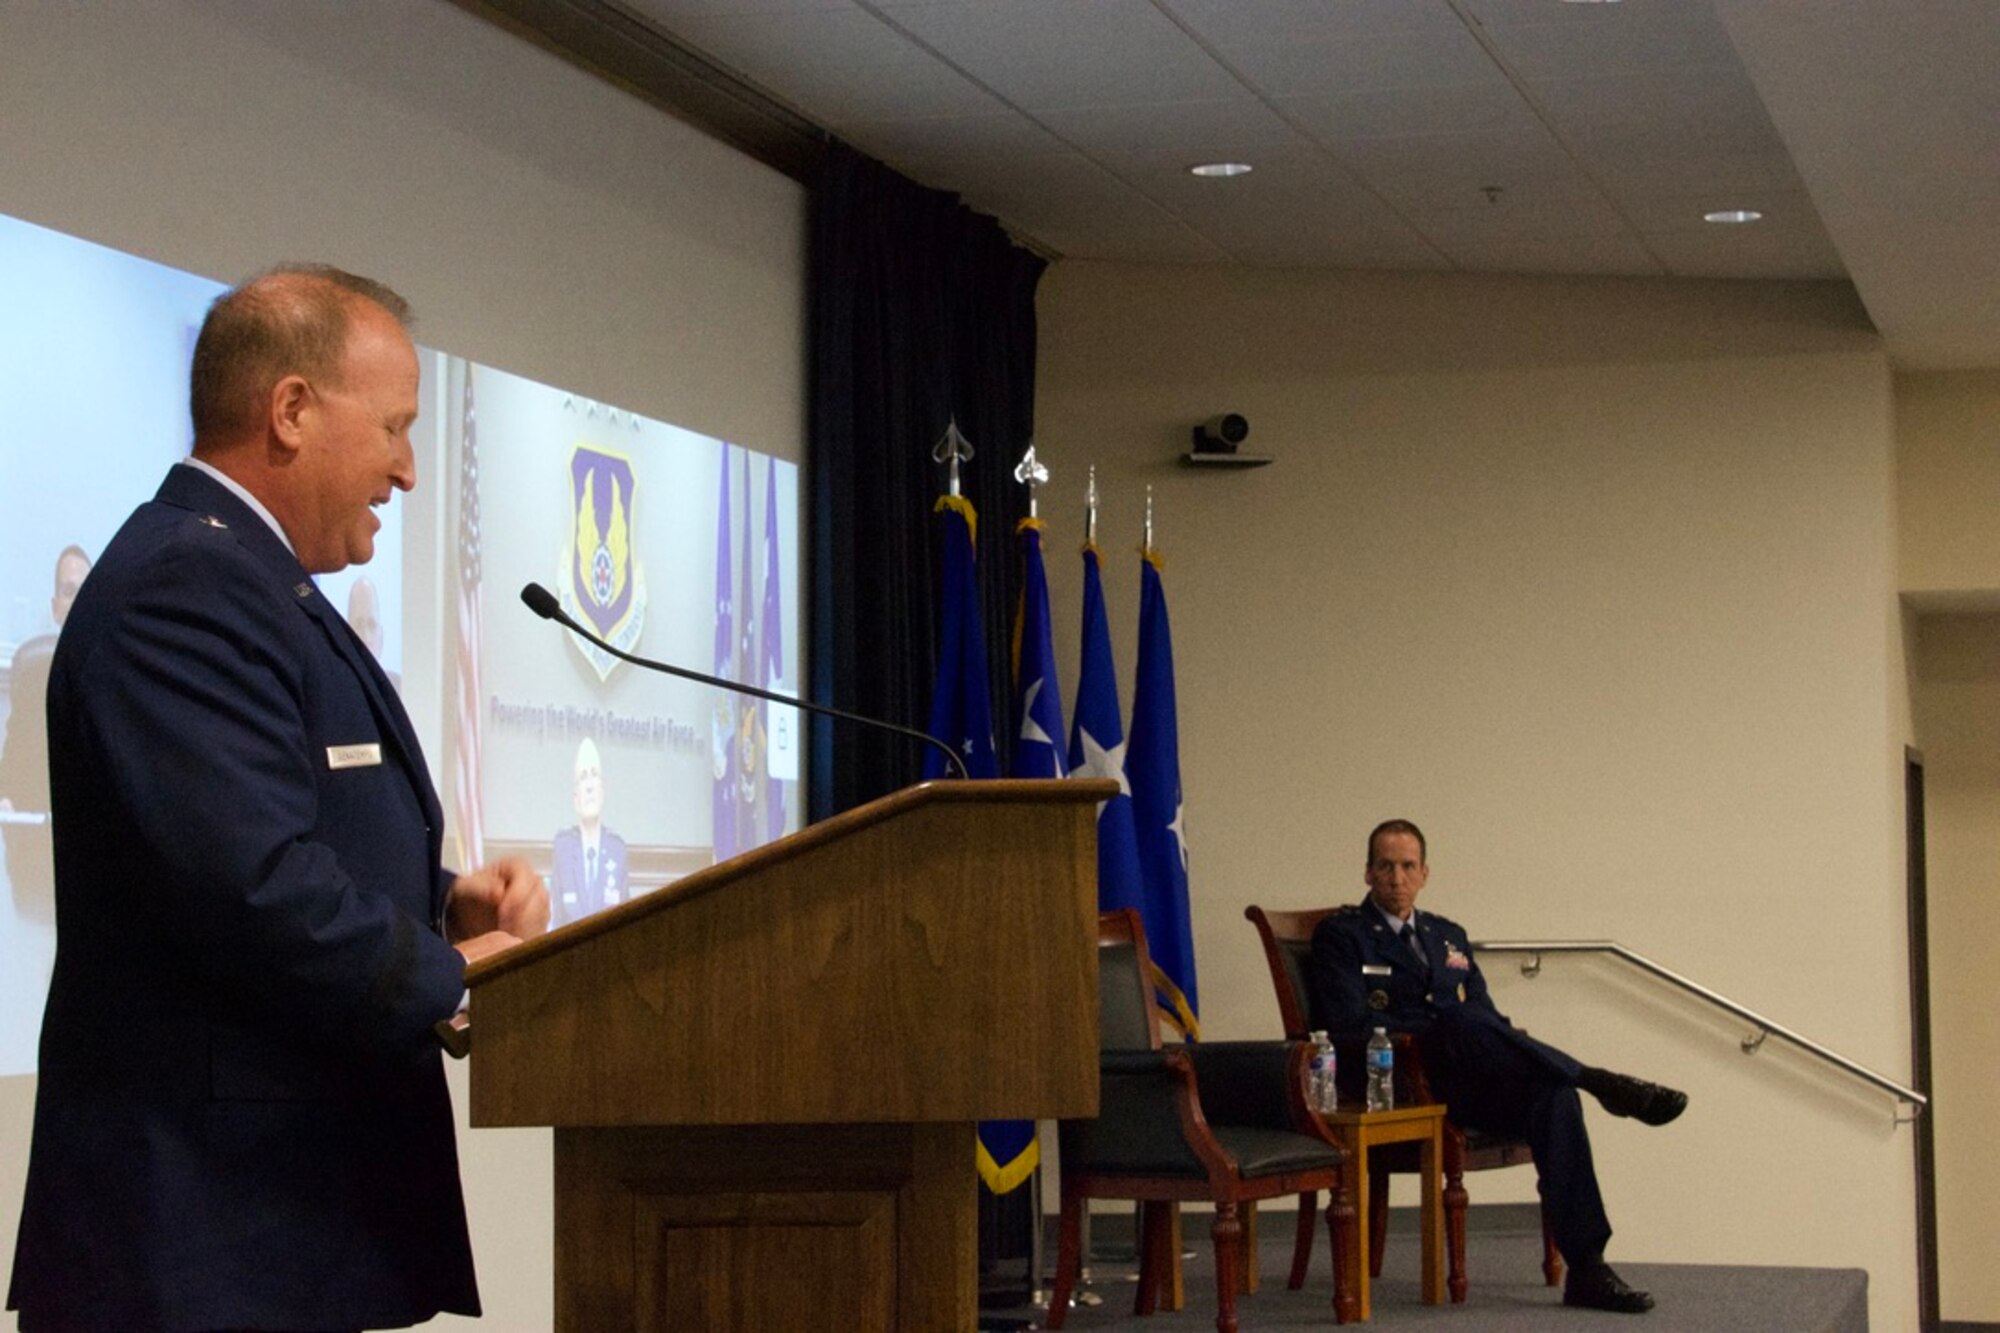 Brig. Gen. Anthony W. “Awgie” Genatempo, left, speaks to Maj. Gen. Shaun Q. Morris, right, during the Air Force Nuclear Weapons Center's ceremony where Genatempo assumed command from Morris. (Air Force photo by Capt. Matthew Rice)